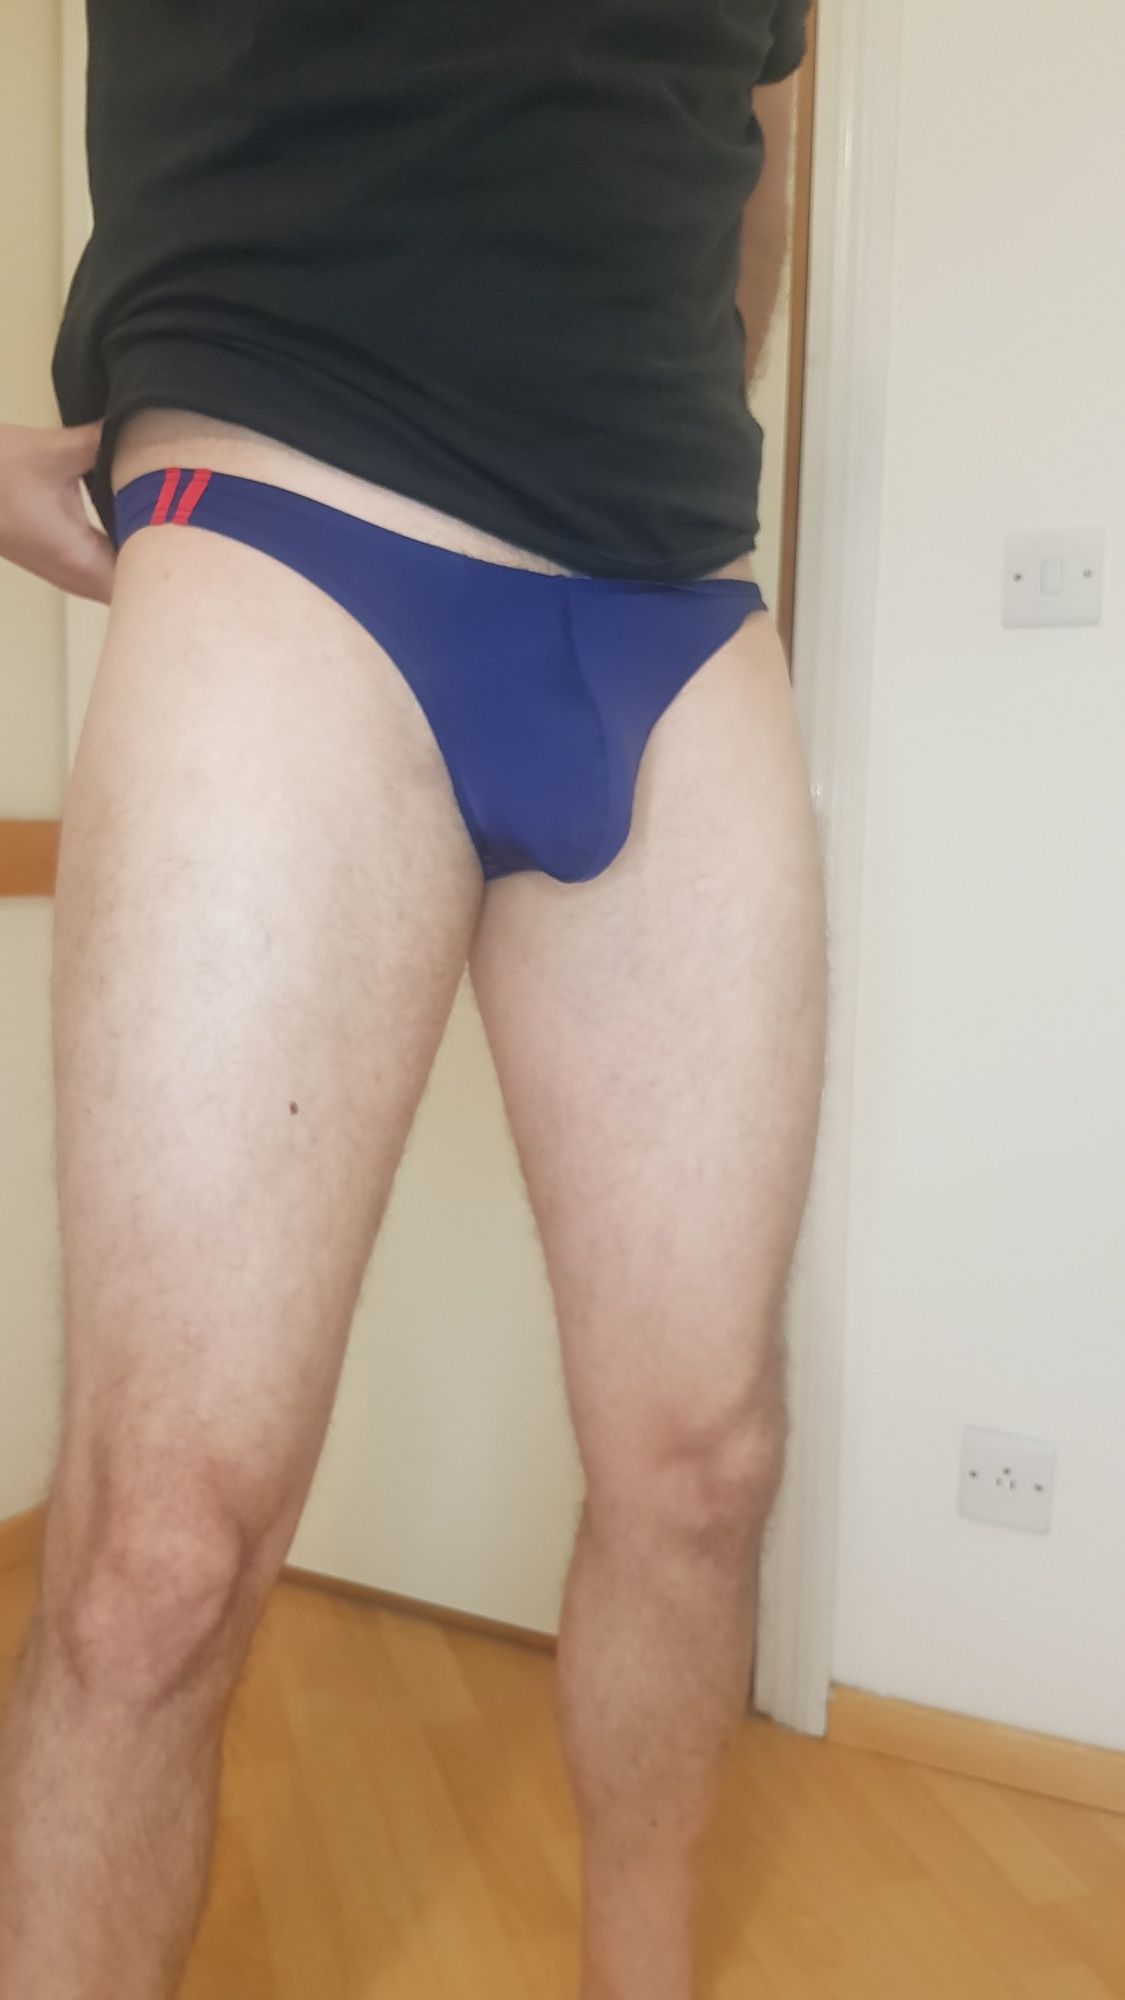 Should i go to pool in this speedos? #2